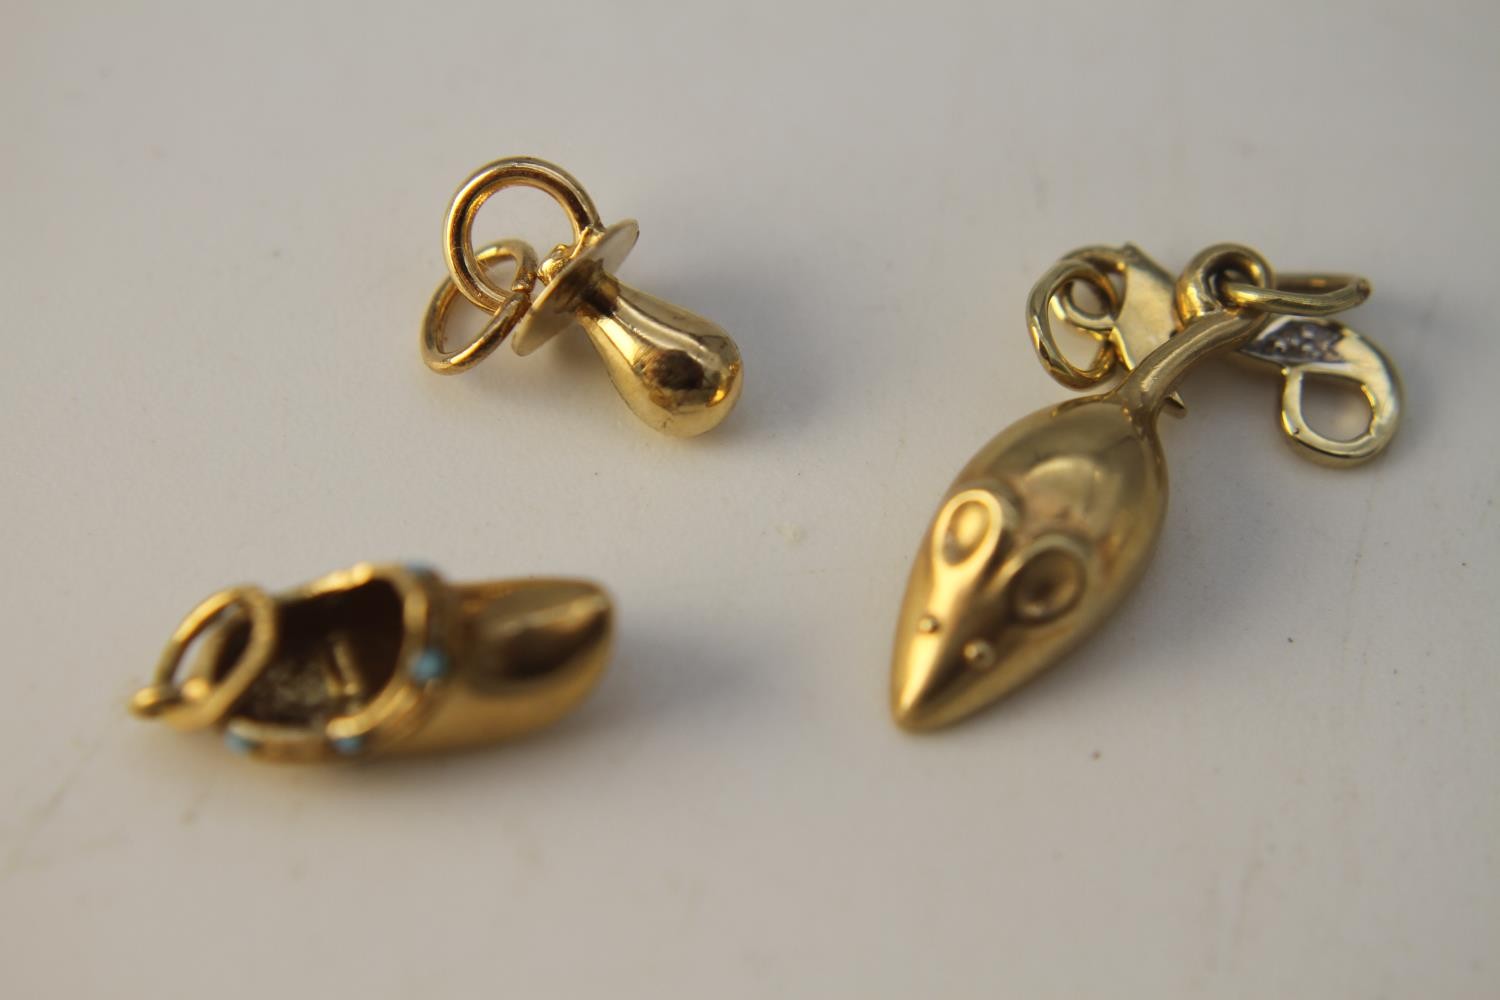 Four 14 carat yellow gold charms. Including a gold clog charm set with turquoise cabochons, a gold